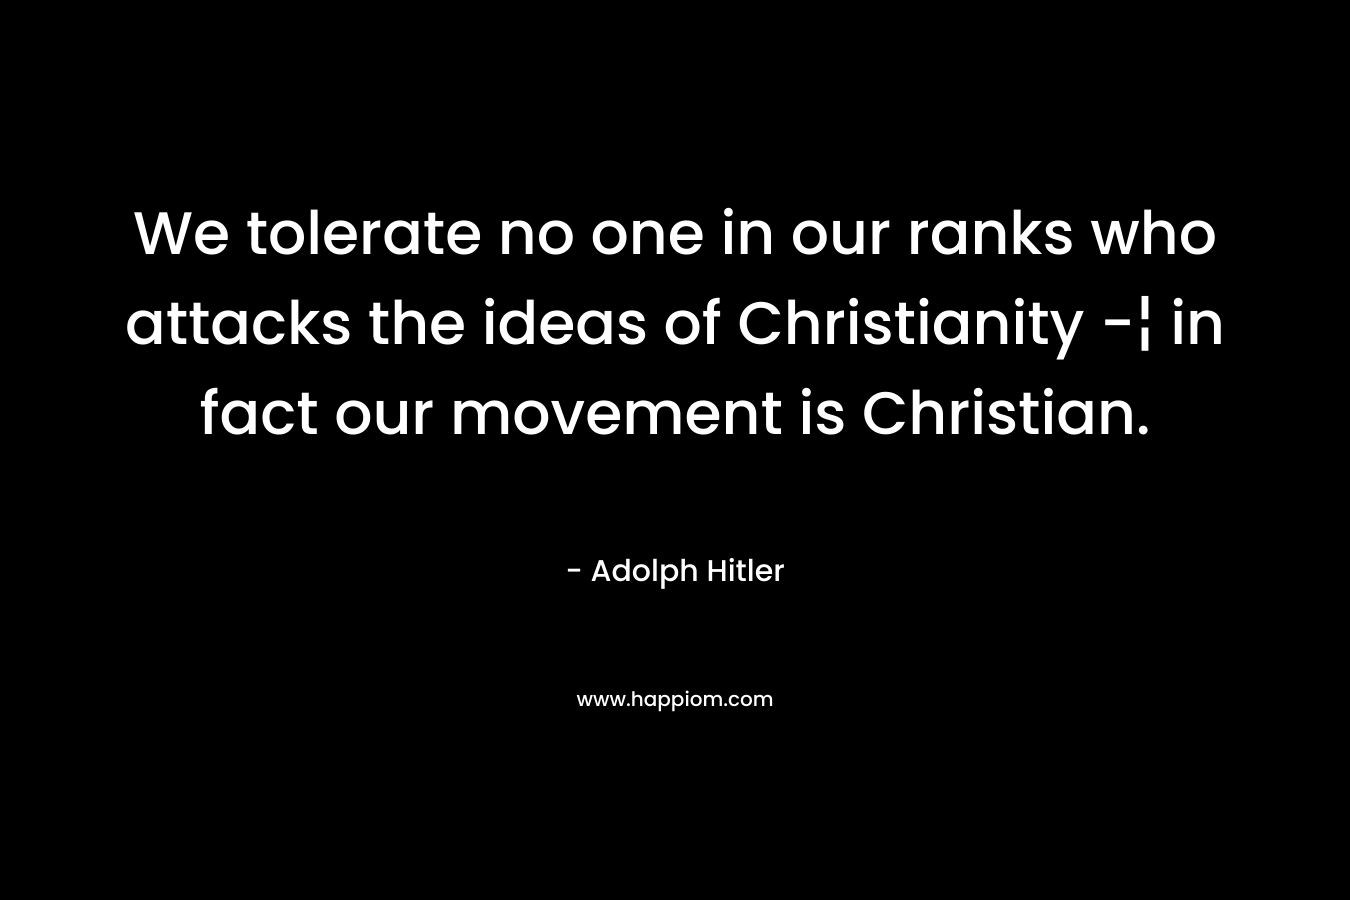 We tolerate no one in our ranks who attacks the ideas of Christianity -¦ in fact our movement is Christian. – Adolph Hitler